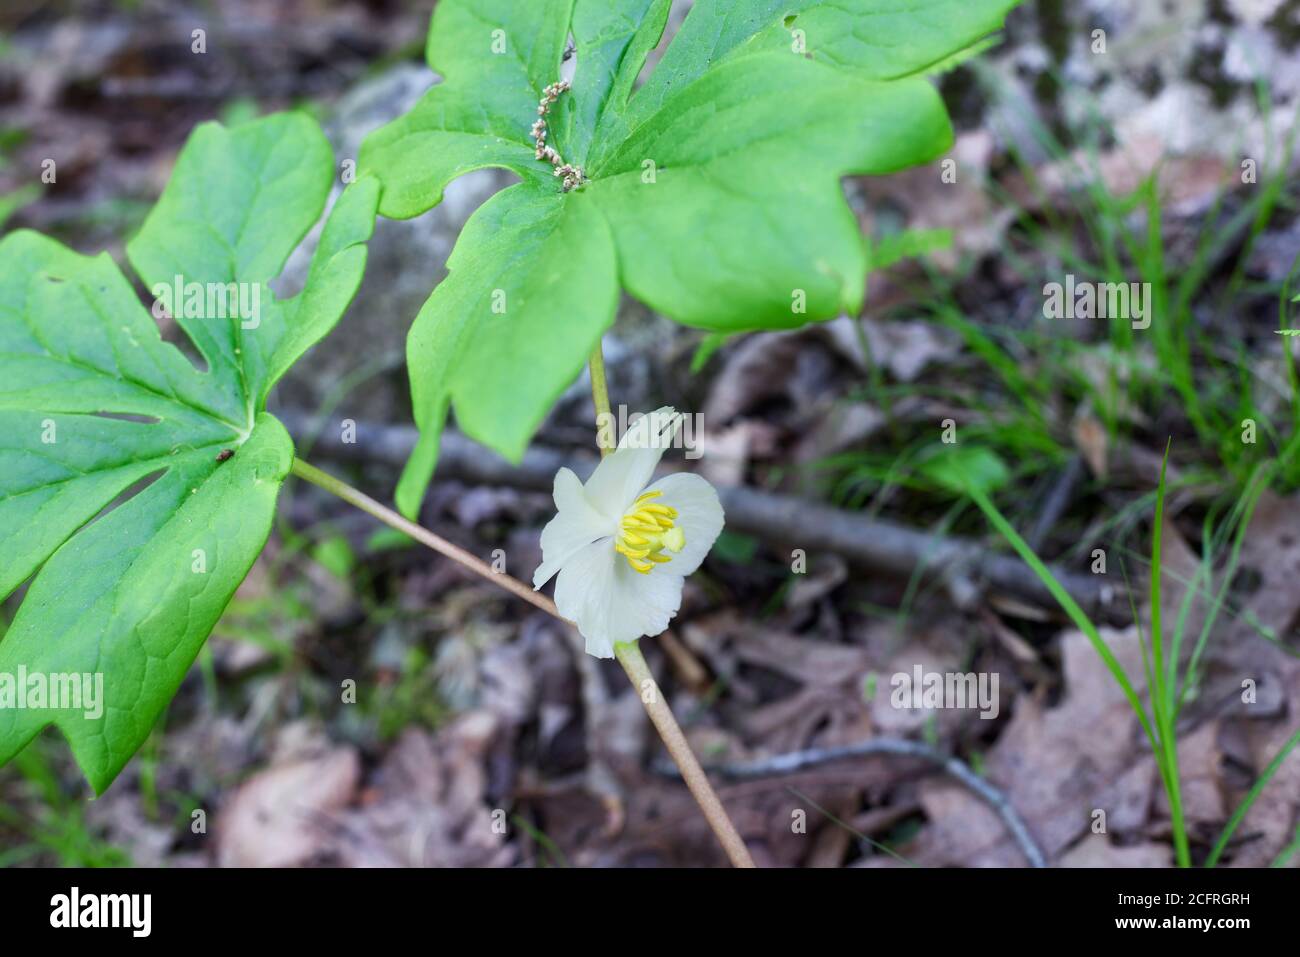 A white mayapple flower, podophyllum peltatum, against a black background in the woods of pennsylvania in early springtime. Stock Photo